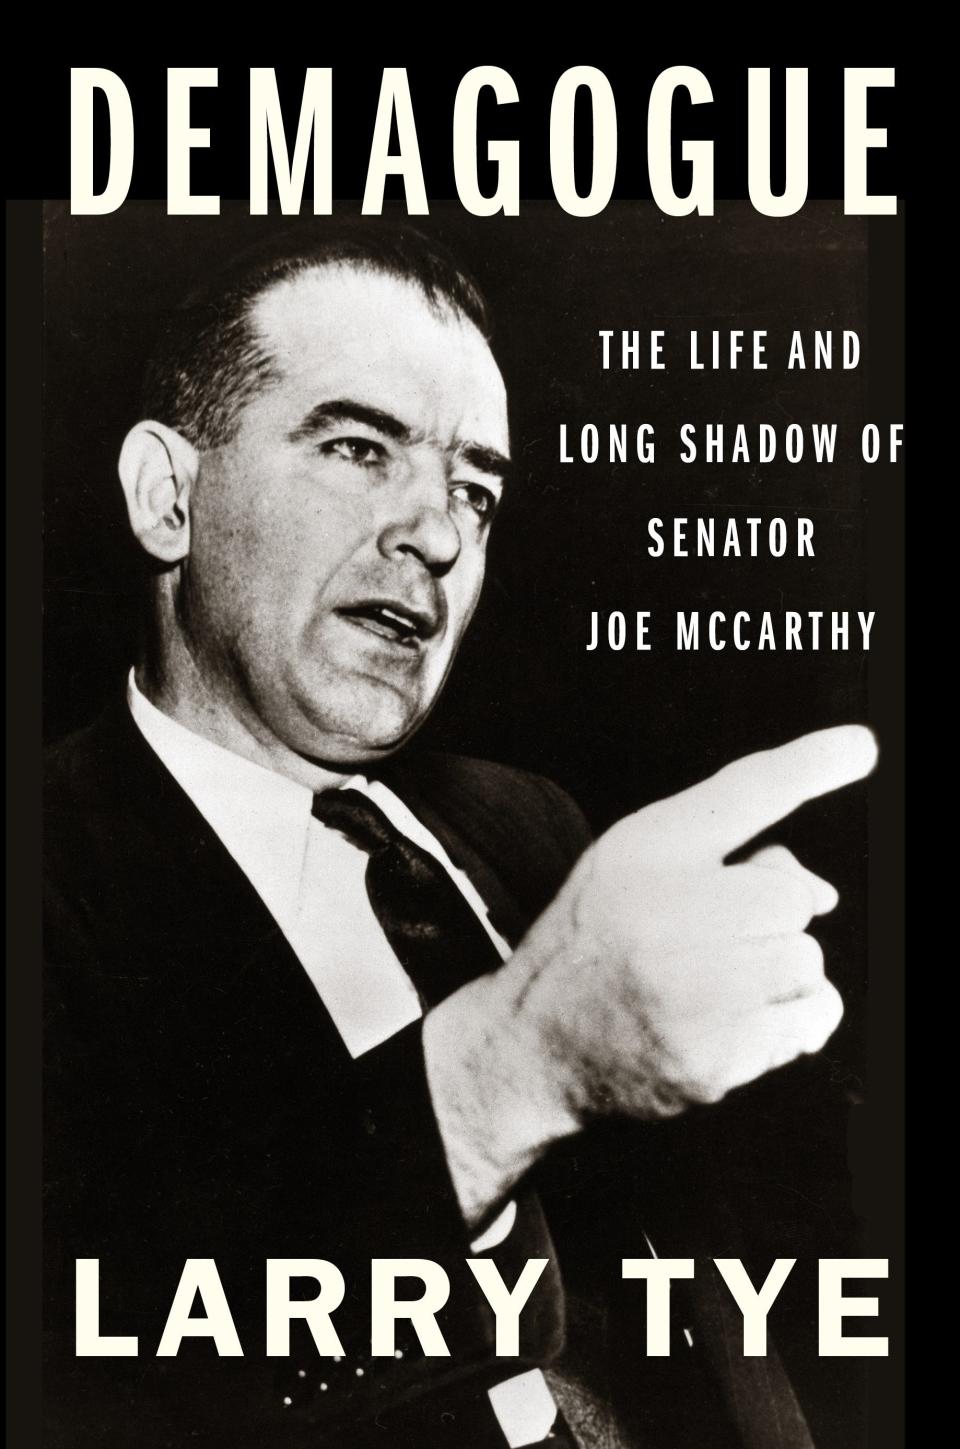 "Demagogue: The Life and Long Shadow of Senator Joe MCarthy," by Larry Tye, will be published July 7, 2020, by Houghton Mifflin Harcourt.